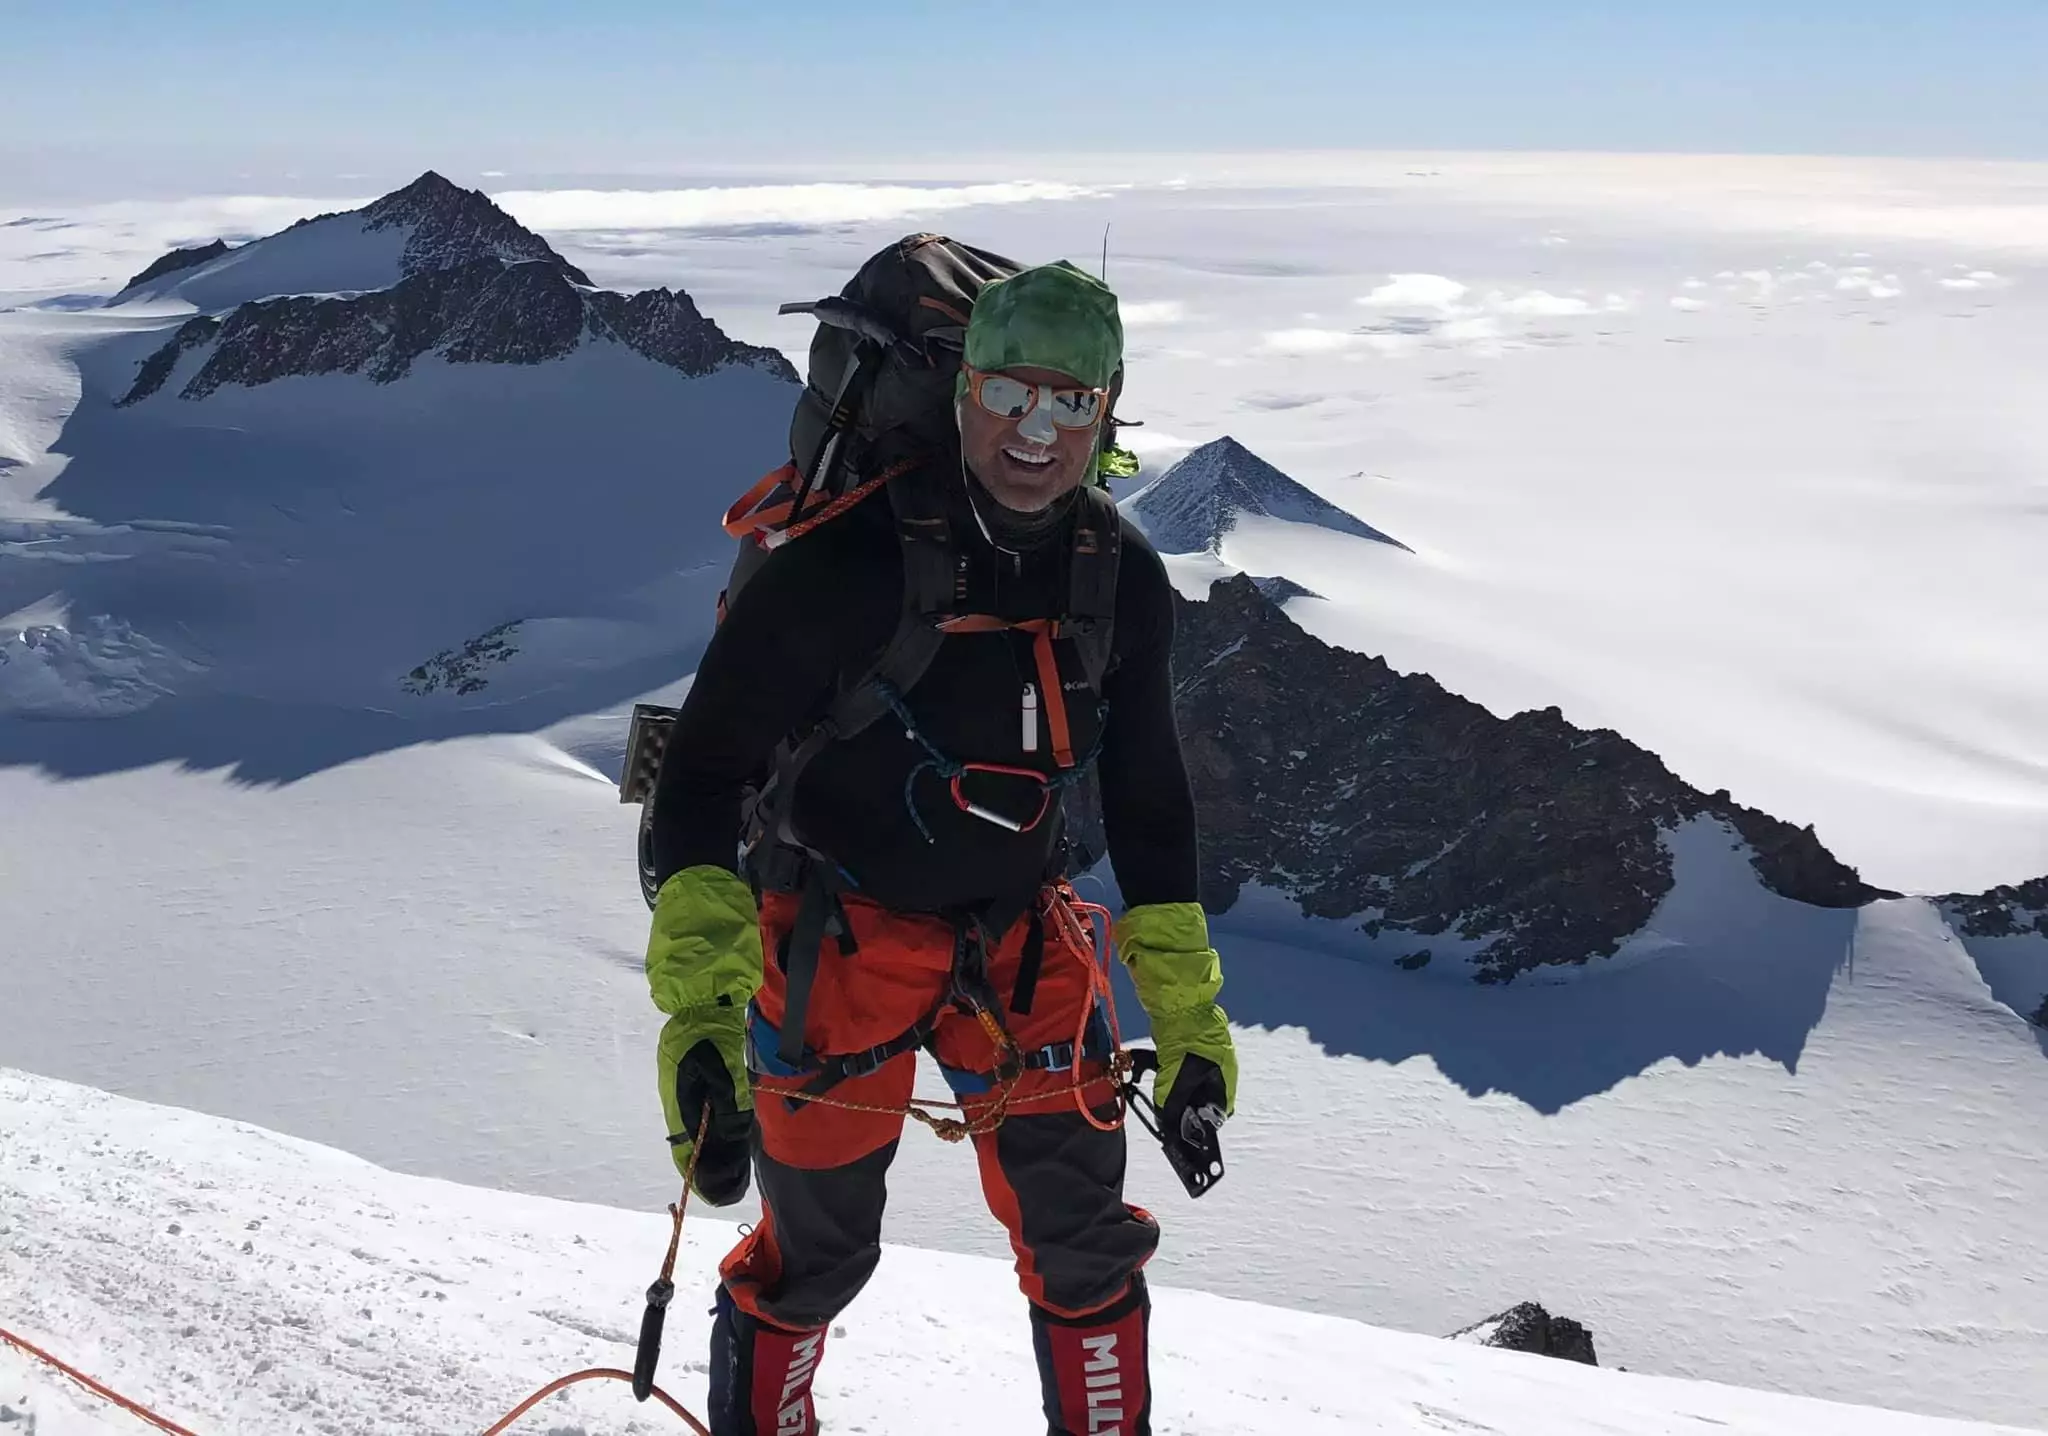 Donald Cash was on his final climb of the Seven Summit climbing mission.